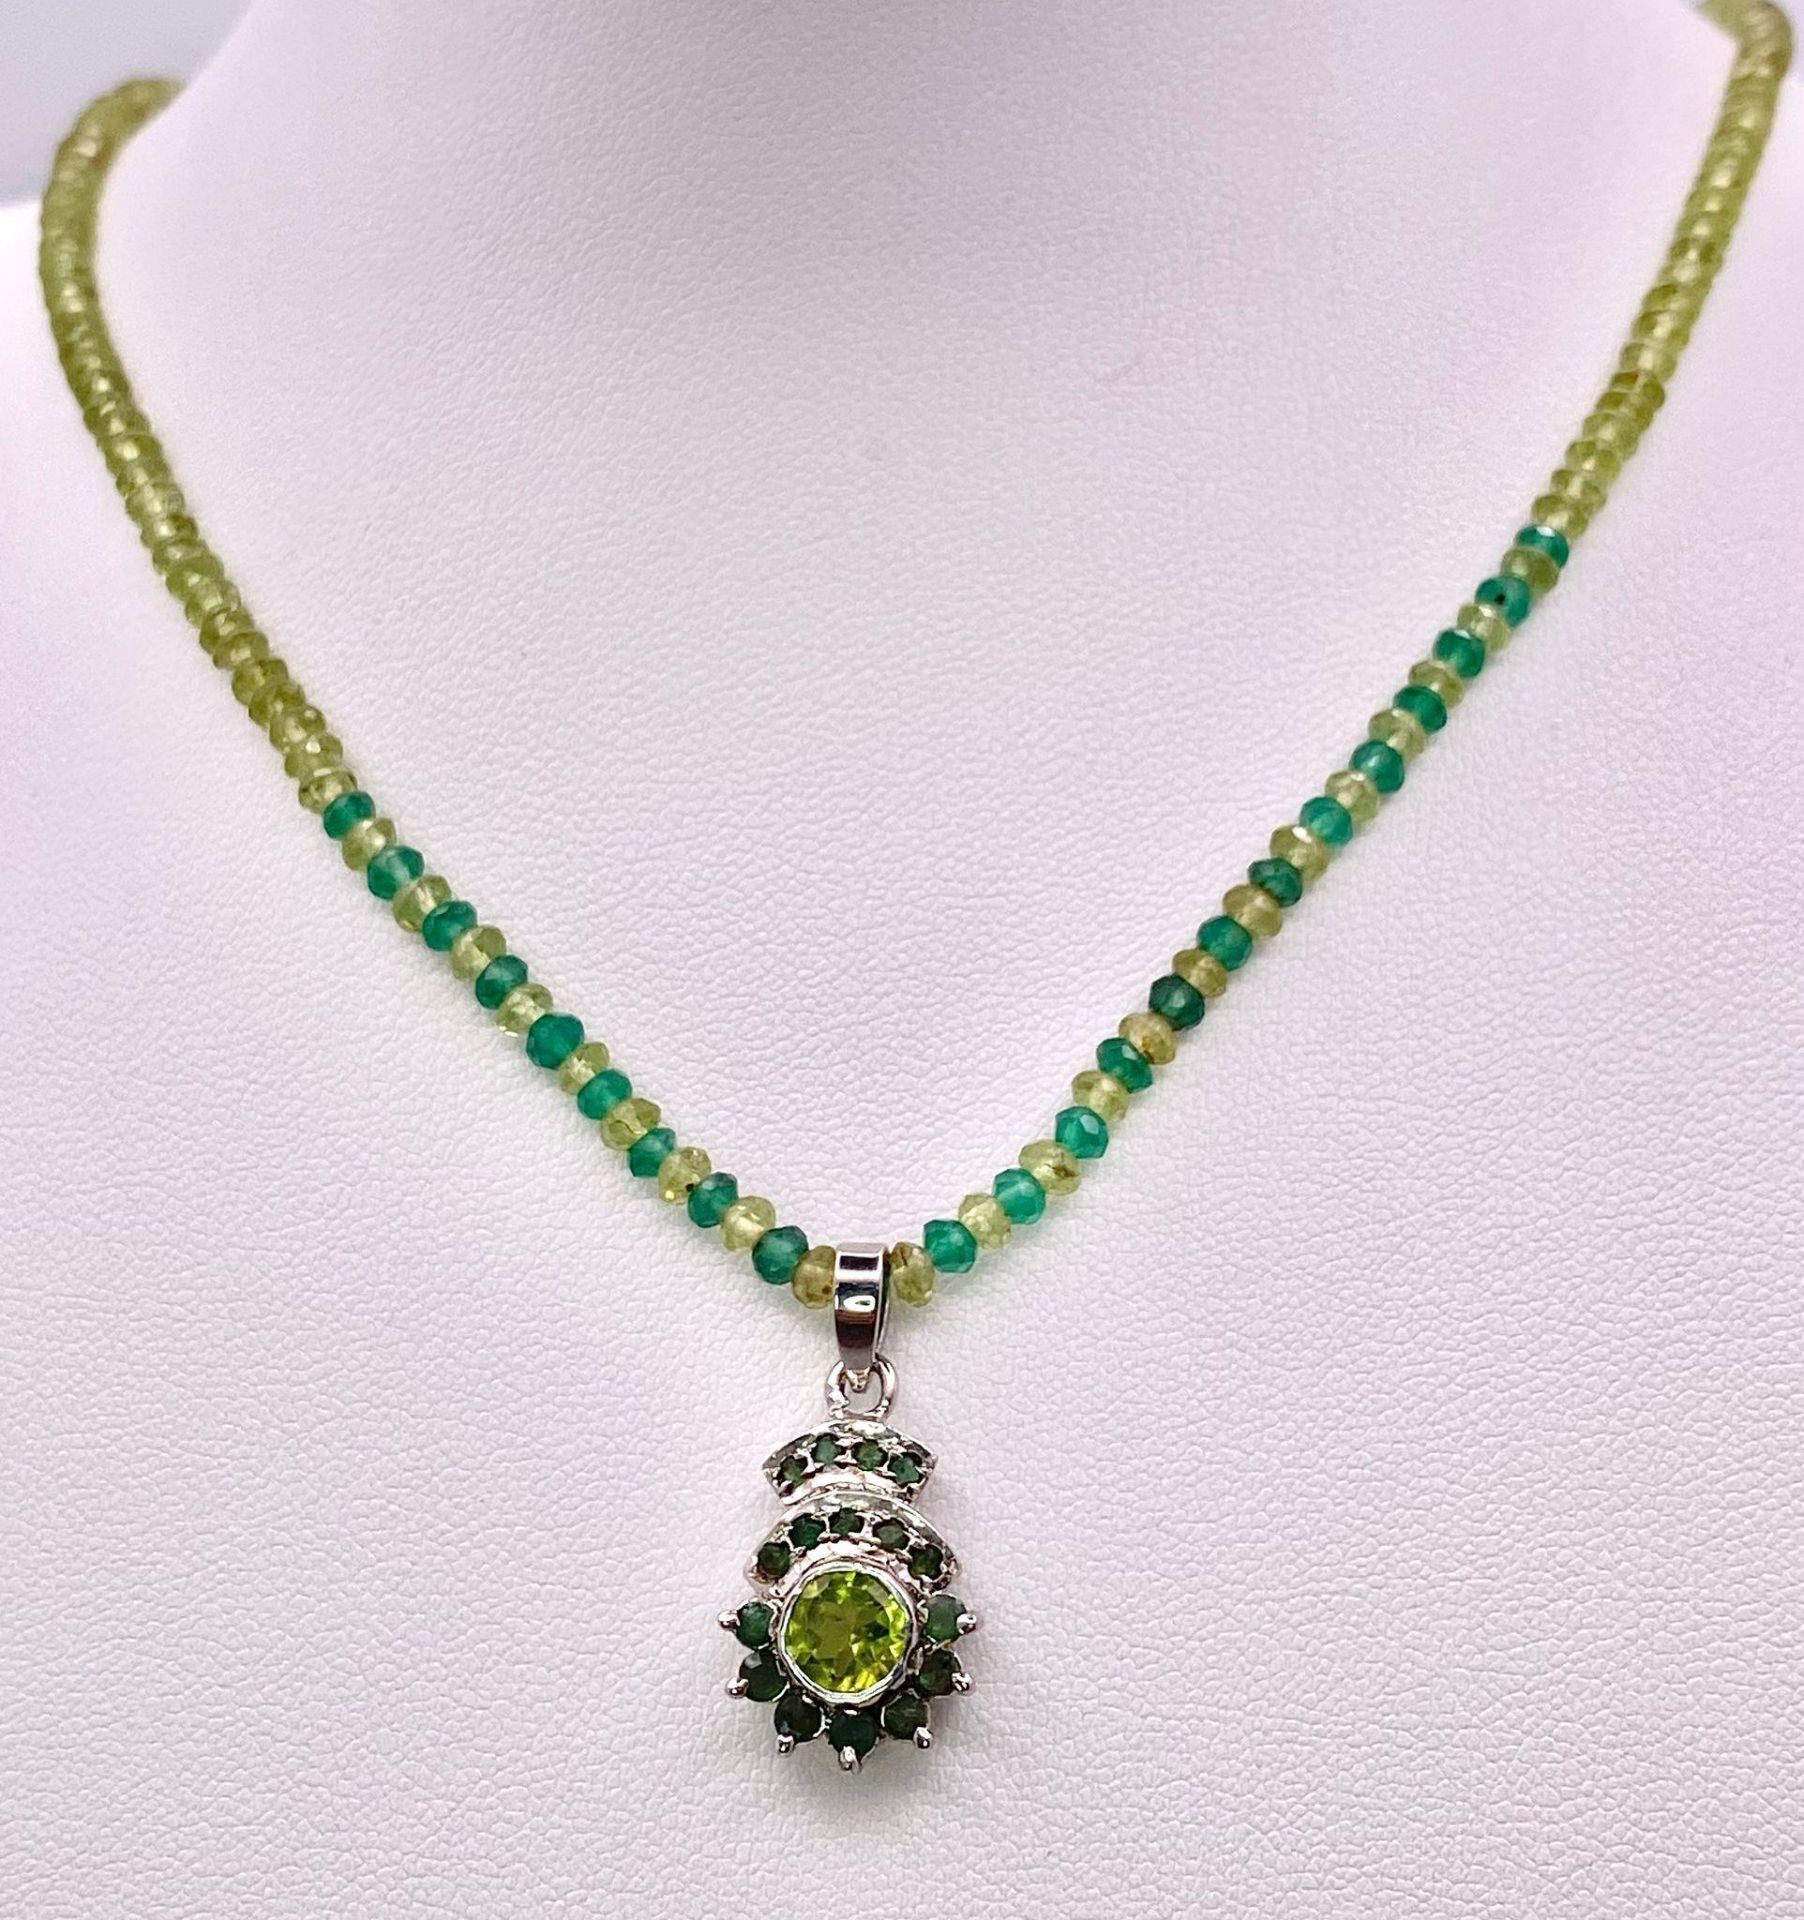 A Peridot & Green Onyx Beaded Necklace with Pendant drop Plus a Pair of Peridot Earrings. Set in 925 - Image 3 of 4